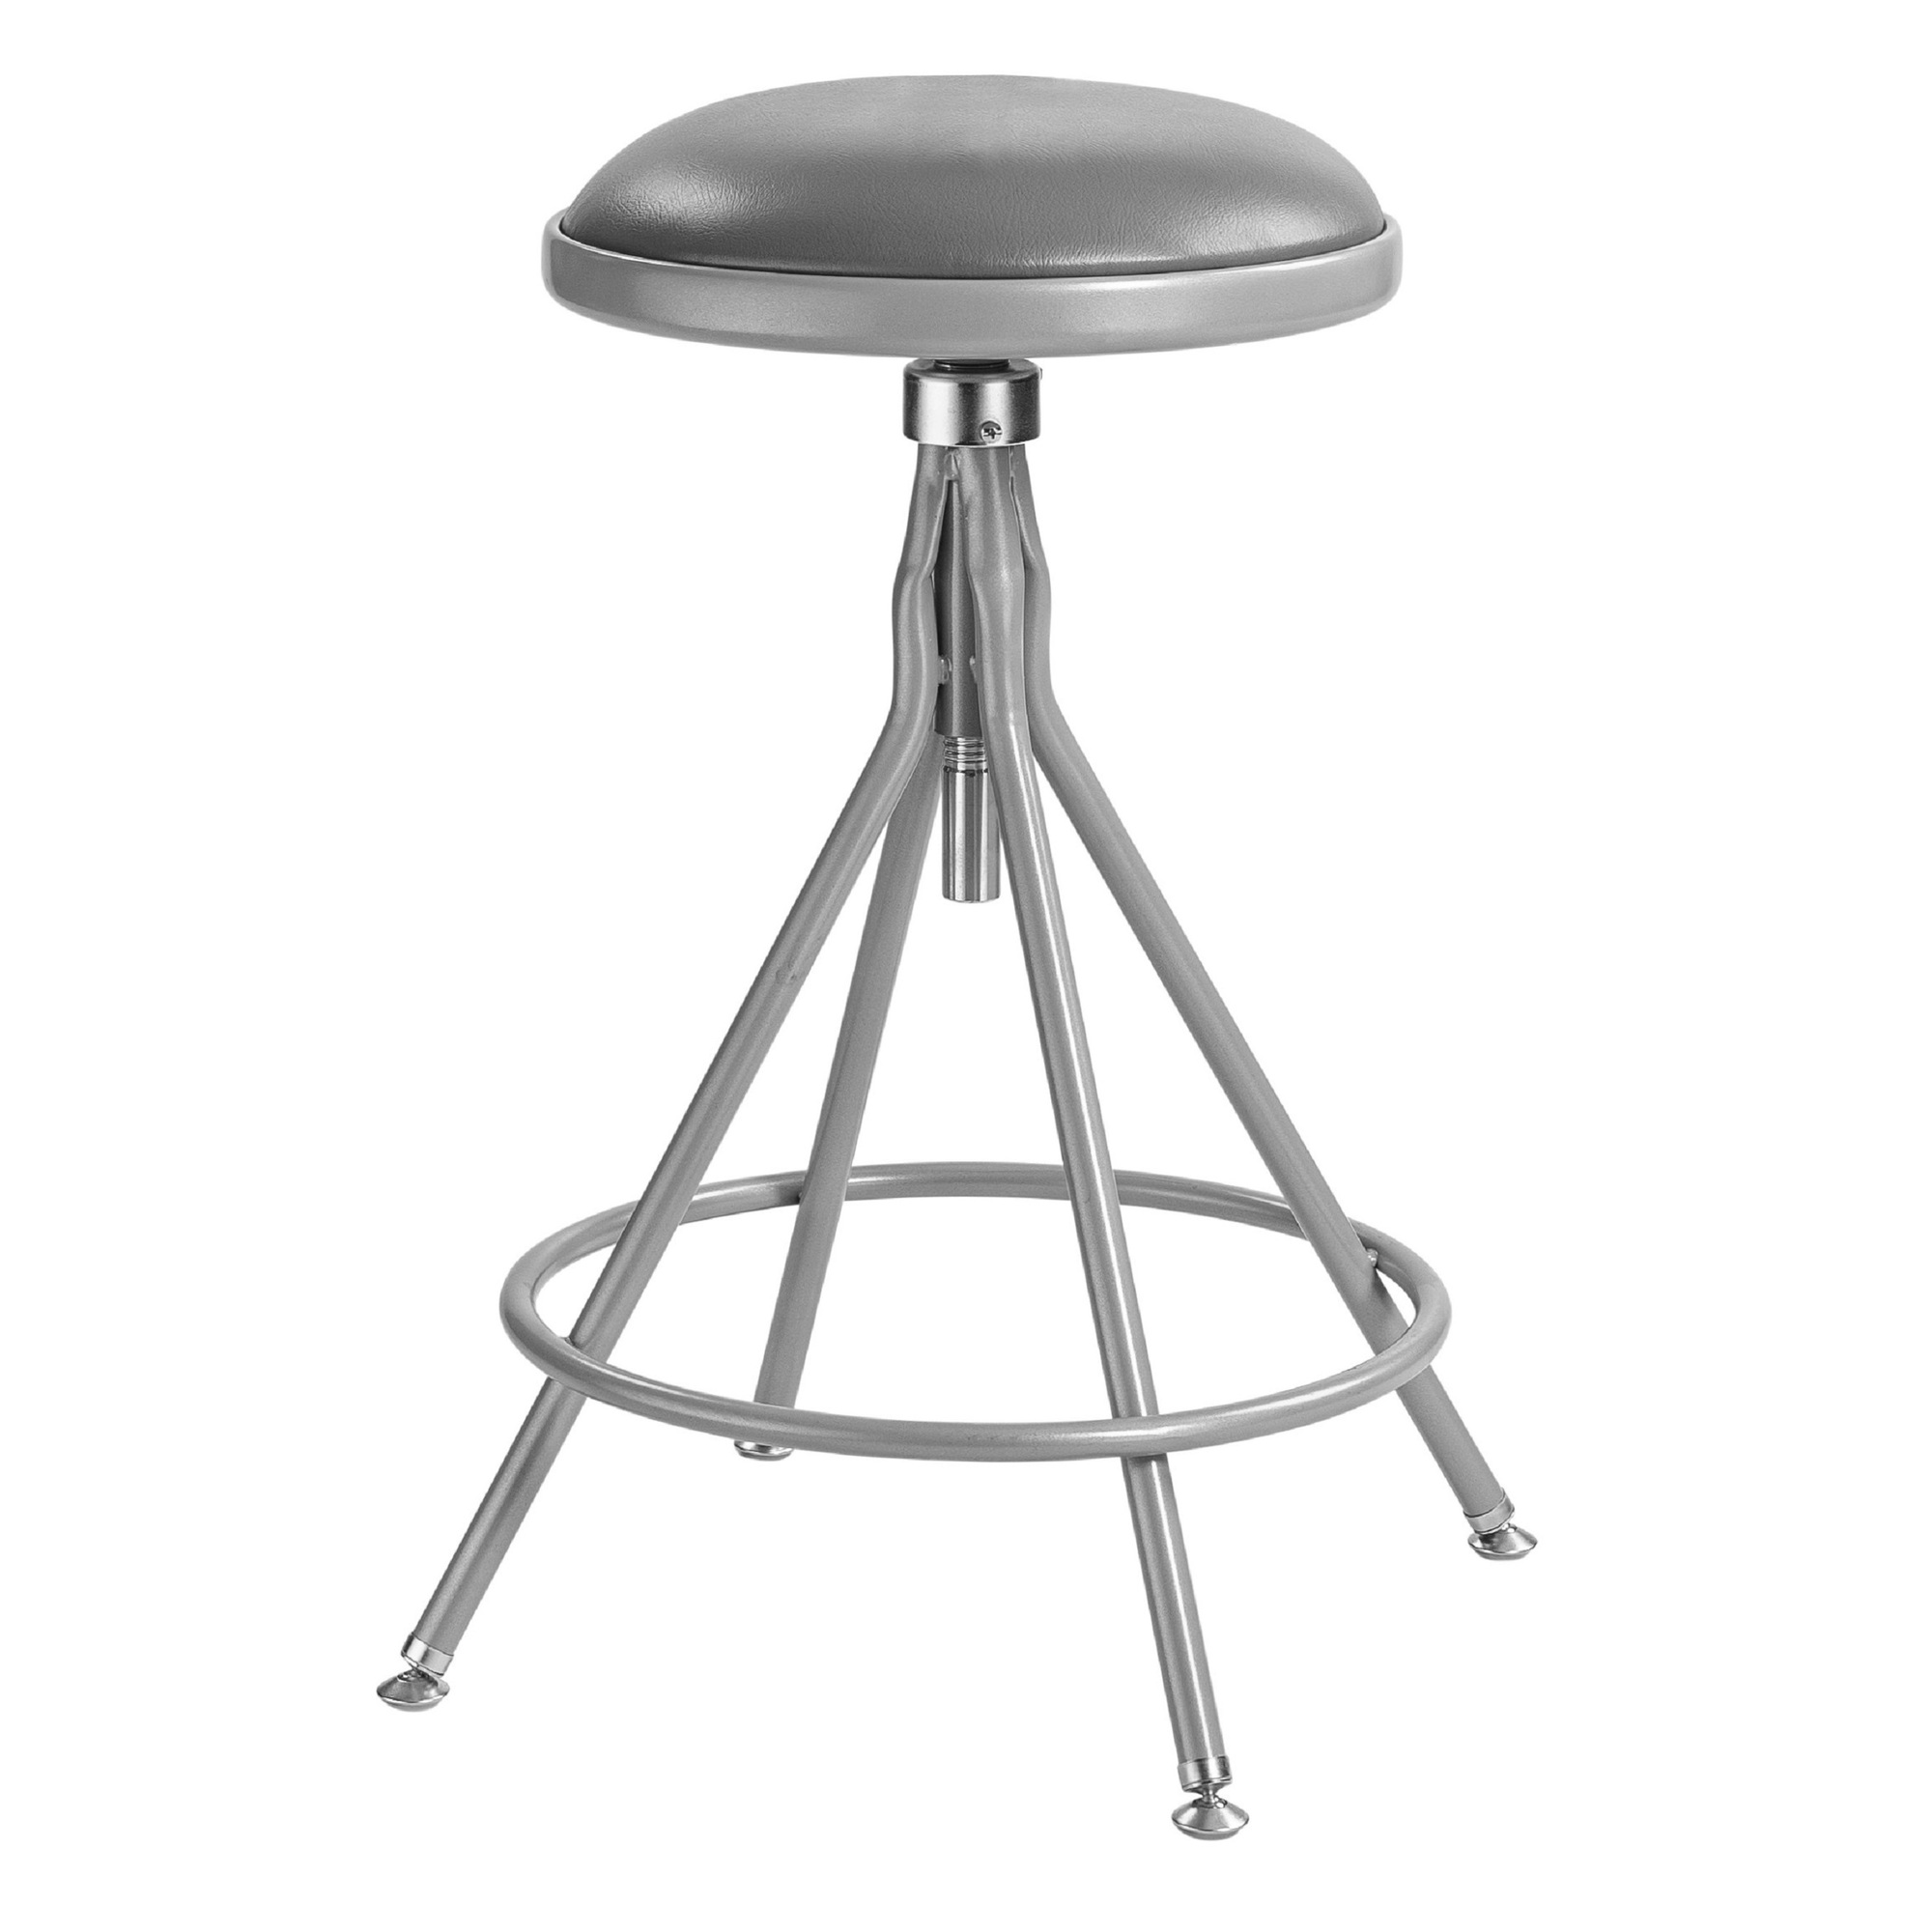 National Public Seating, 24 -30Inch H Adjust Vinyl Swivel Steel Stool, Primary Color Gray, Included (qty.) 1, Seating Type Office Stool, Model 6524H